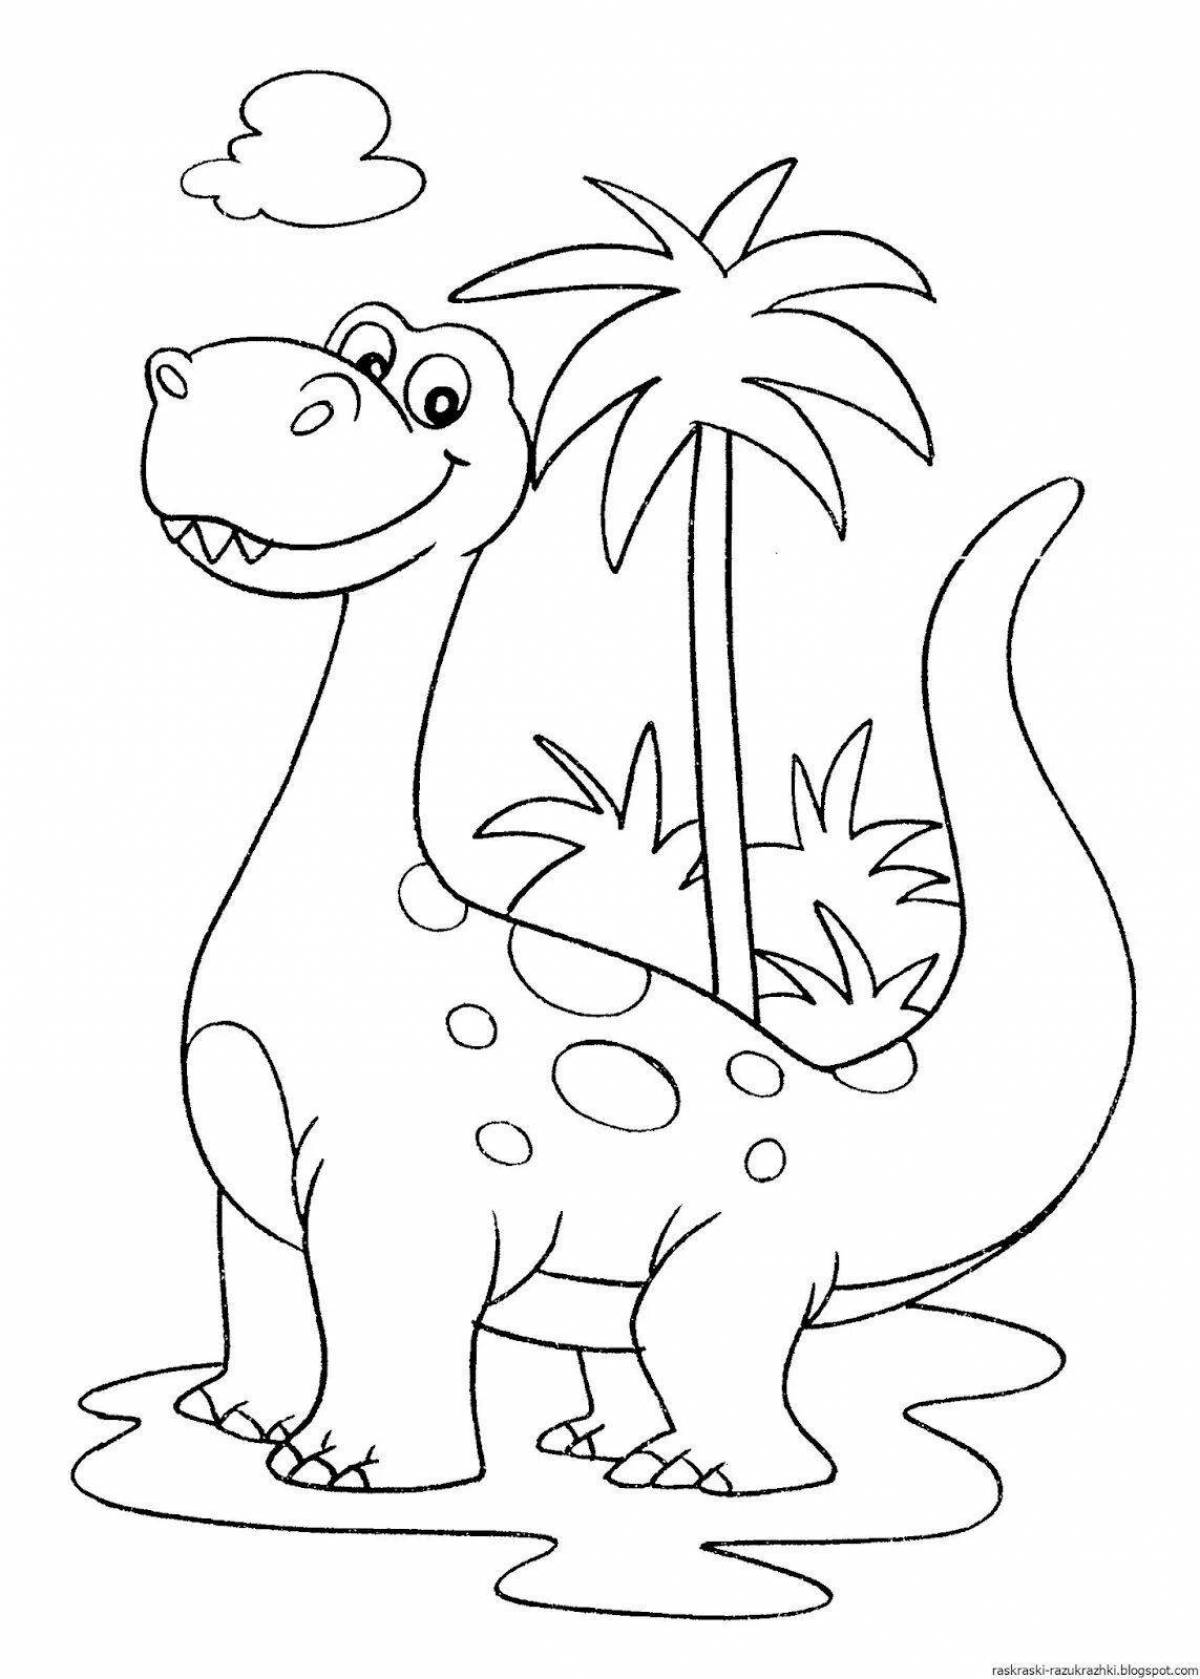 Funny dinosaurs coloring for children 4-5 years old